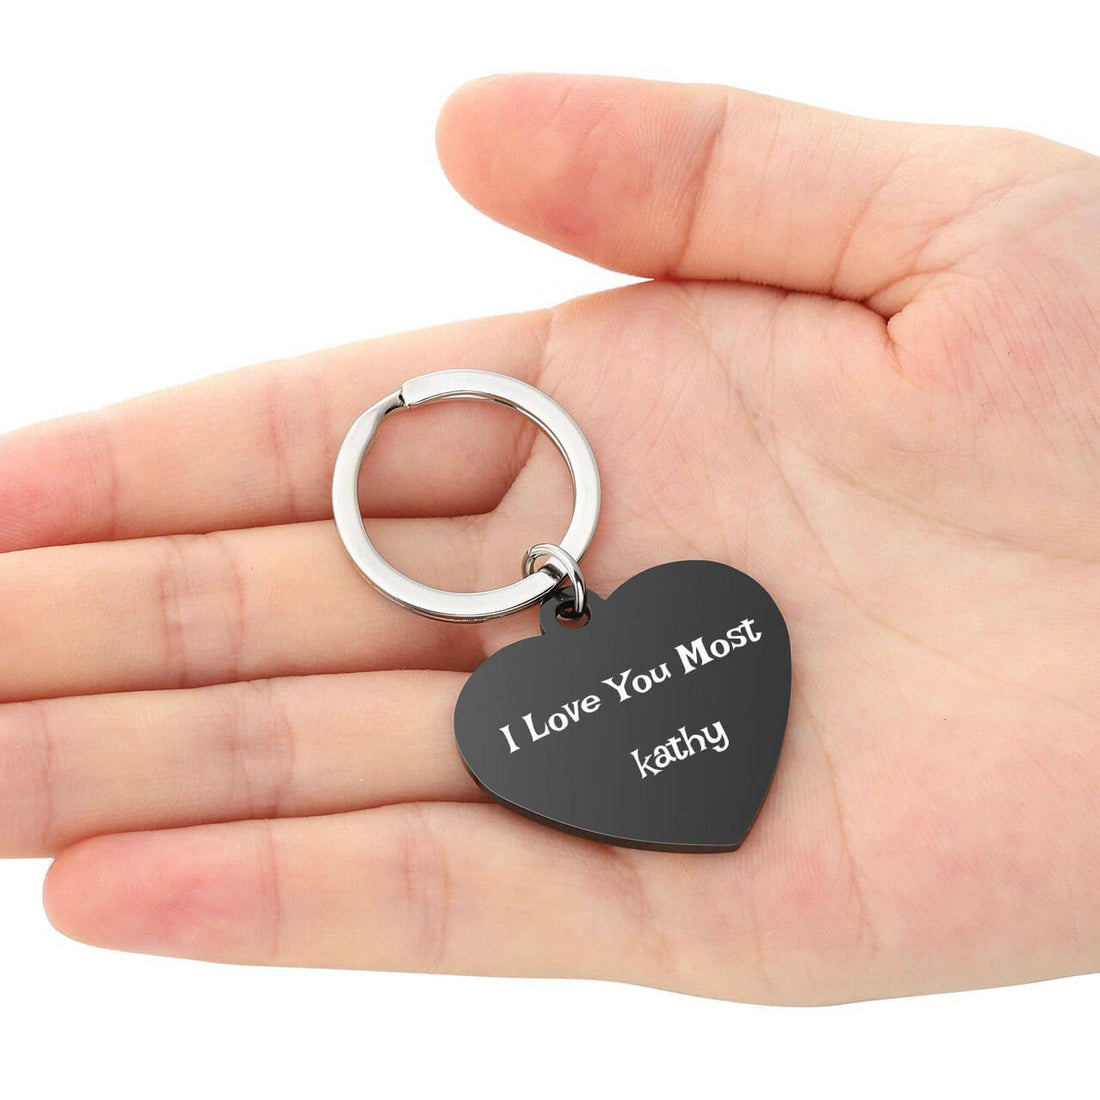 Jovivi personalized name engraved keychain for husband